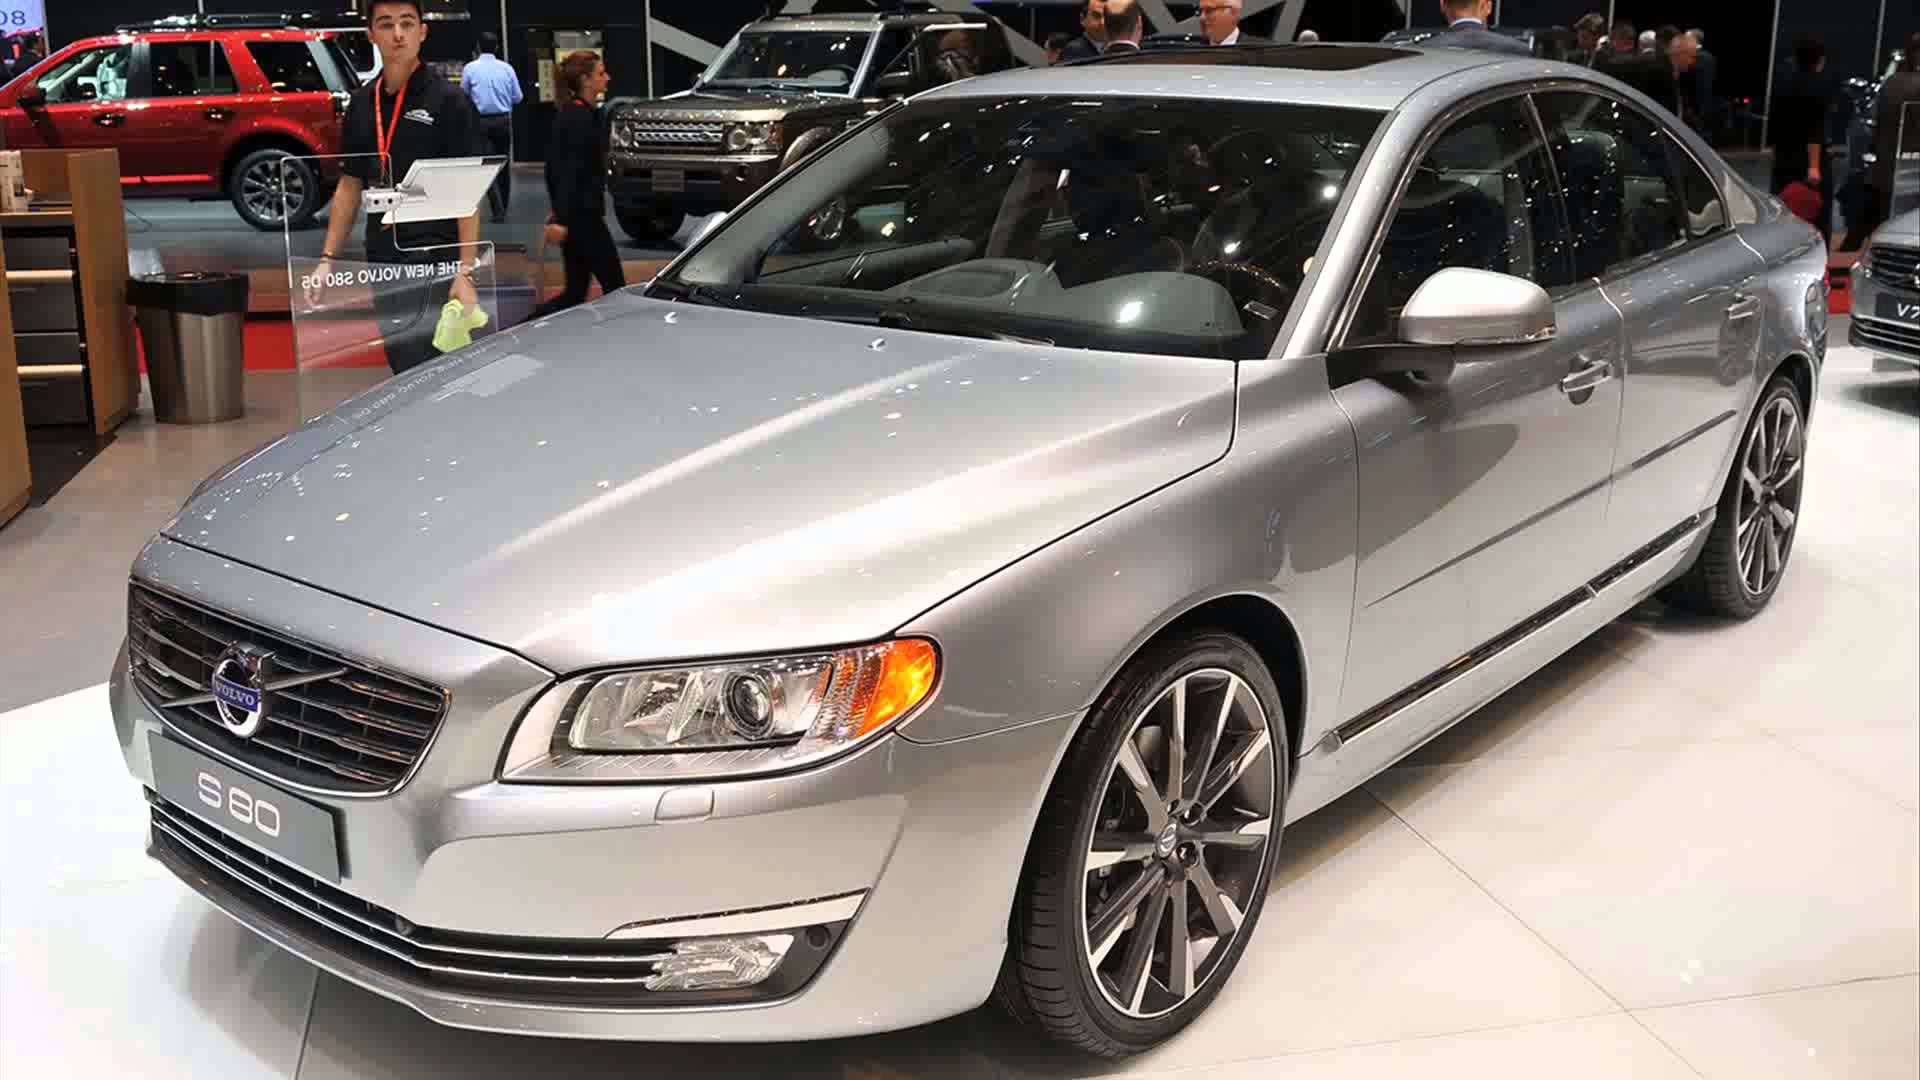 Images of 2014 Volvo S80 | 1920x1080